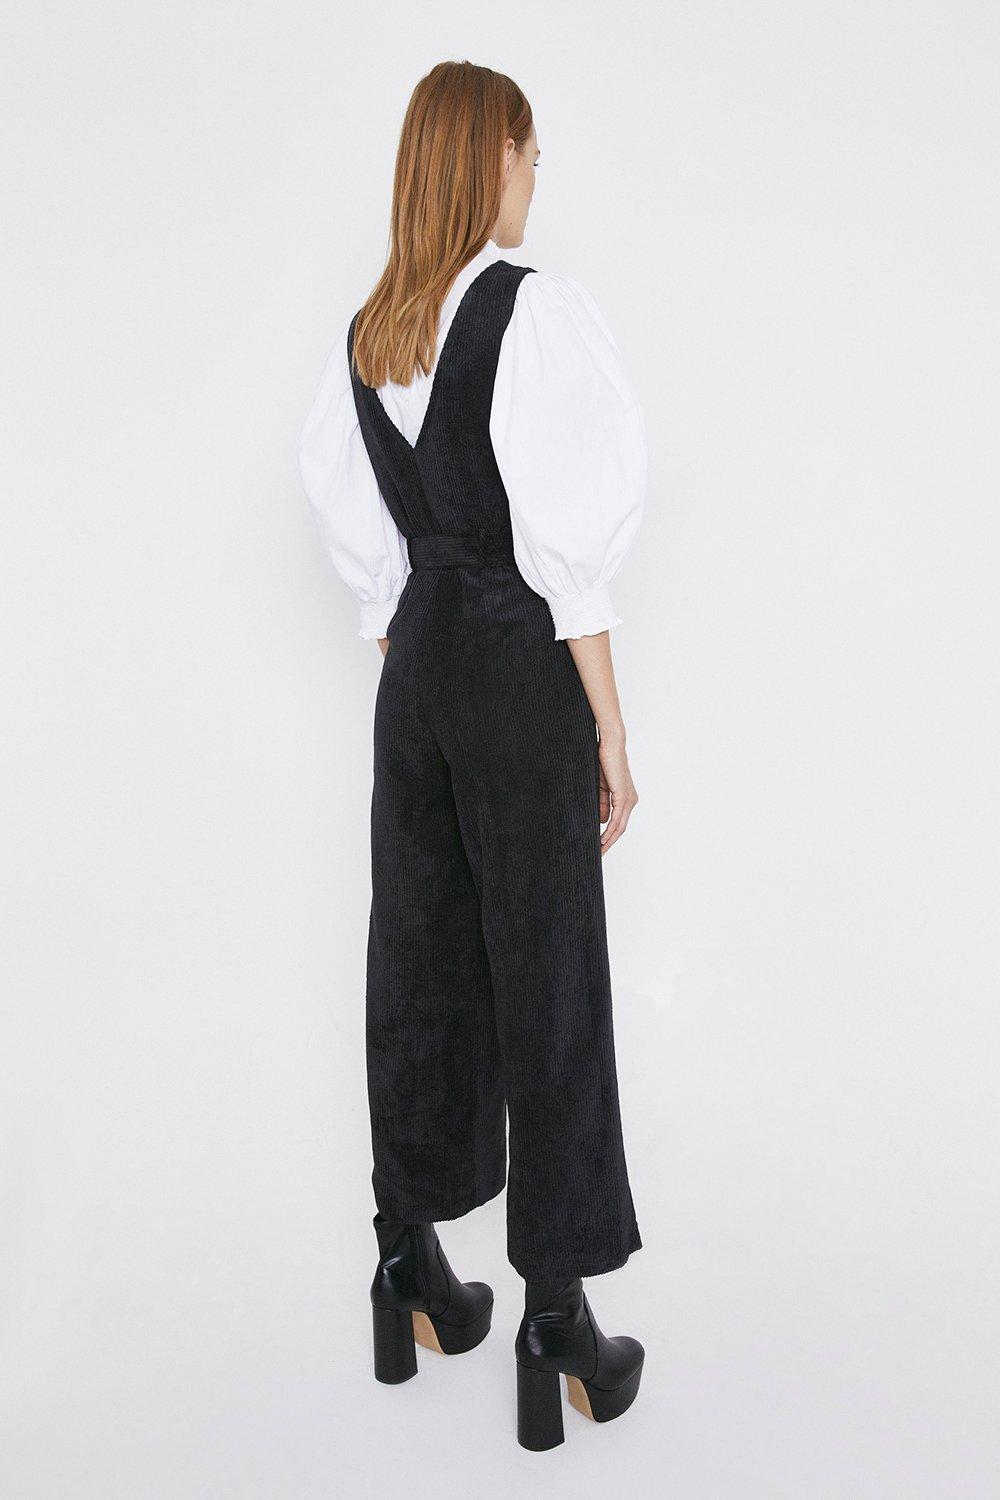 Warehouse NEW Retro Cord Belted Long Sleeve Boilersuit Jumpsuit in Grey 6 to 16 